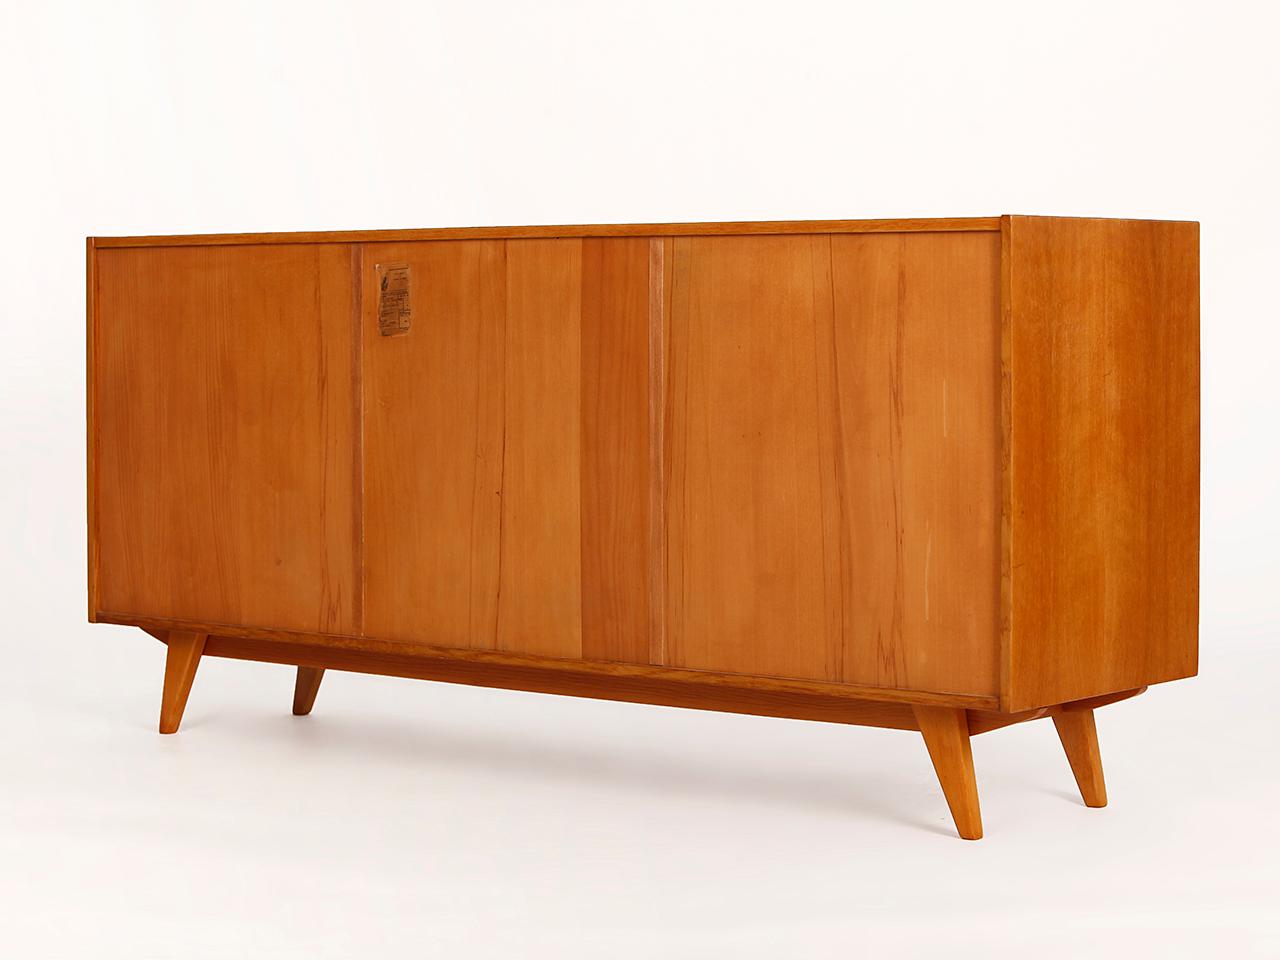 Midcentury Sideboard U 460 by Jiri Jiroutek for Interier Praha, 1960s In Excellent Condition For Sale In Wien, AT